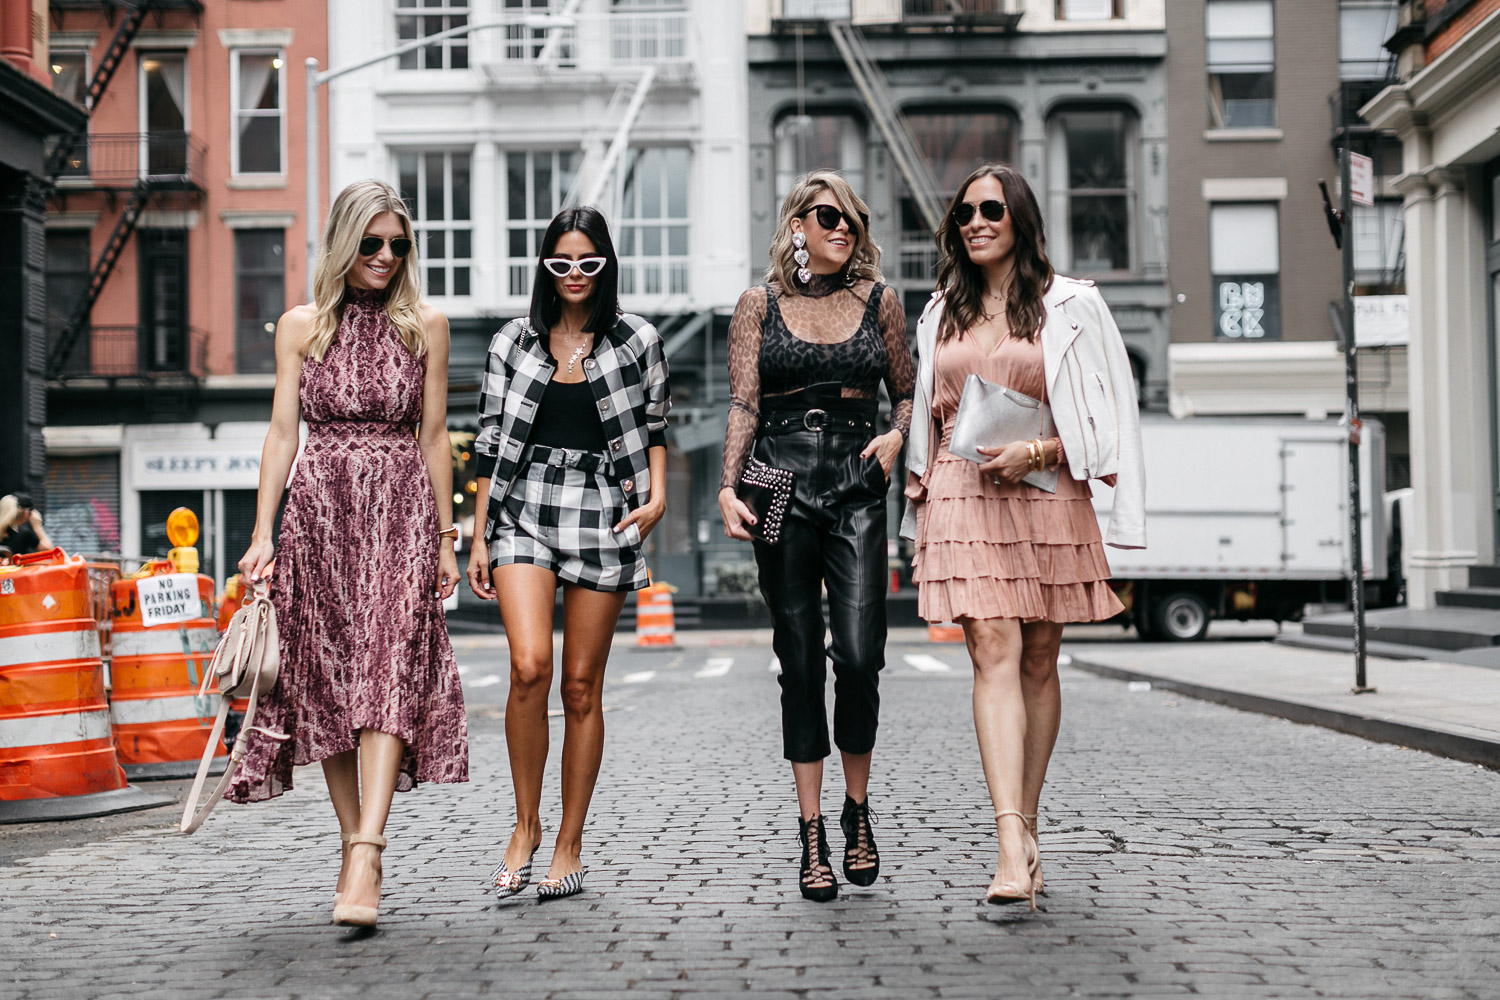 Amanda rocks NYFW with blogger babes Caitlin of Sauci Style, Kristen of The Glamourous Gal and Lindsey of Life Lutzurious